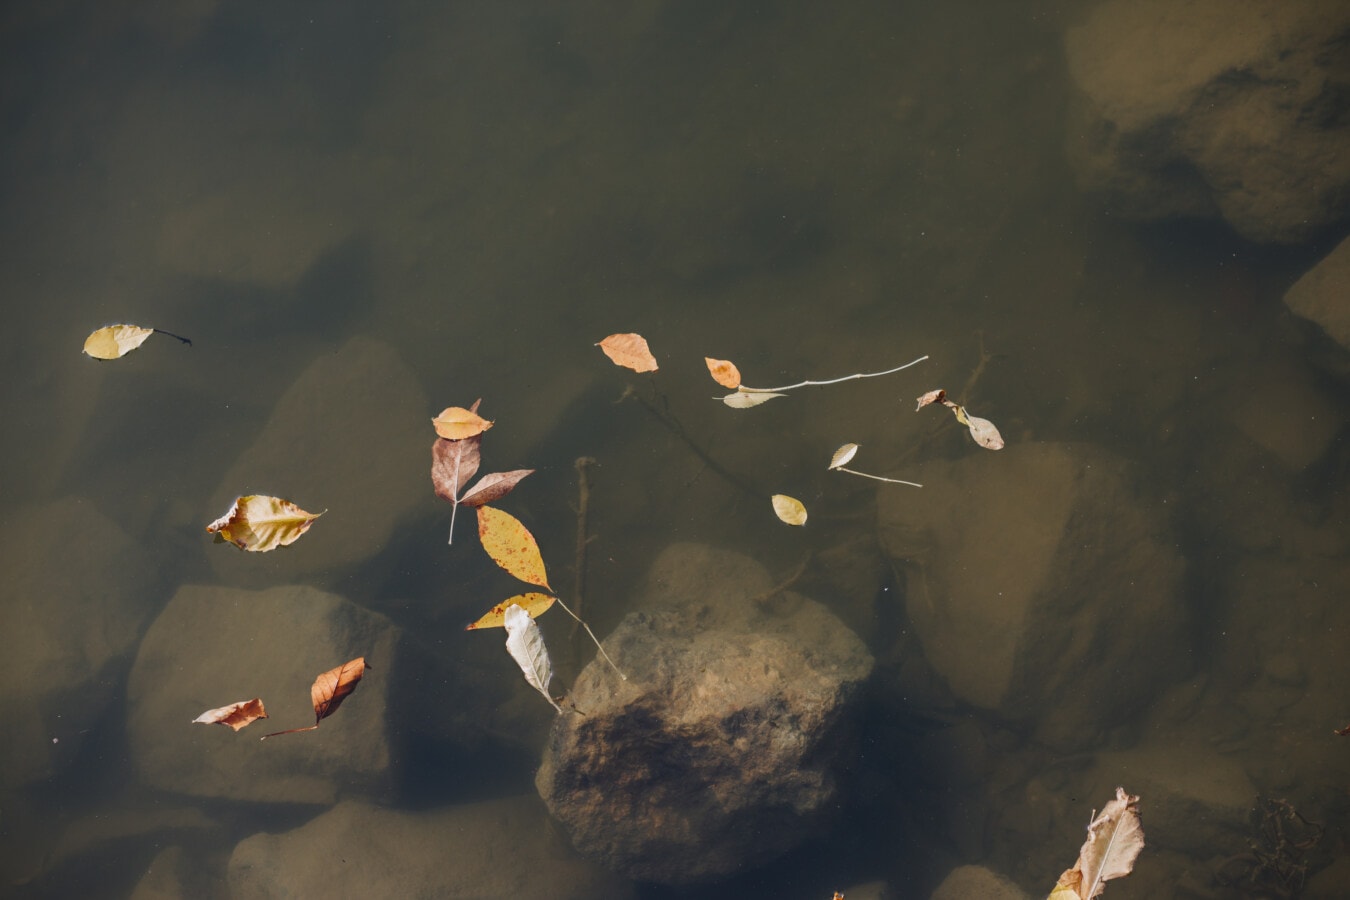 dry, leaves, floating, water level, autumn season, rocky river, underwater, water, aquatic, nature